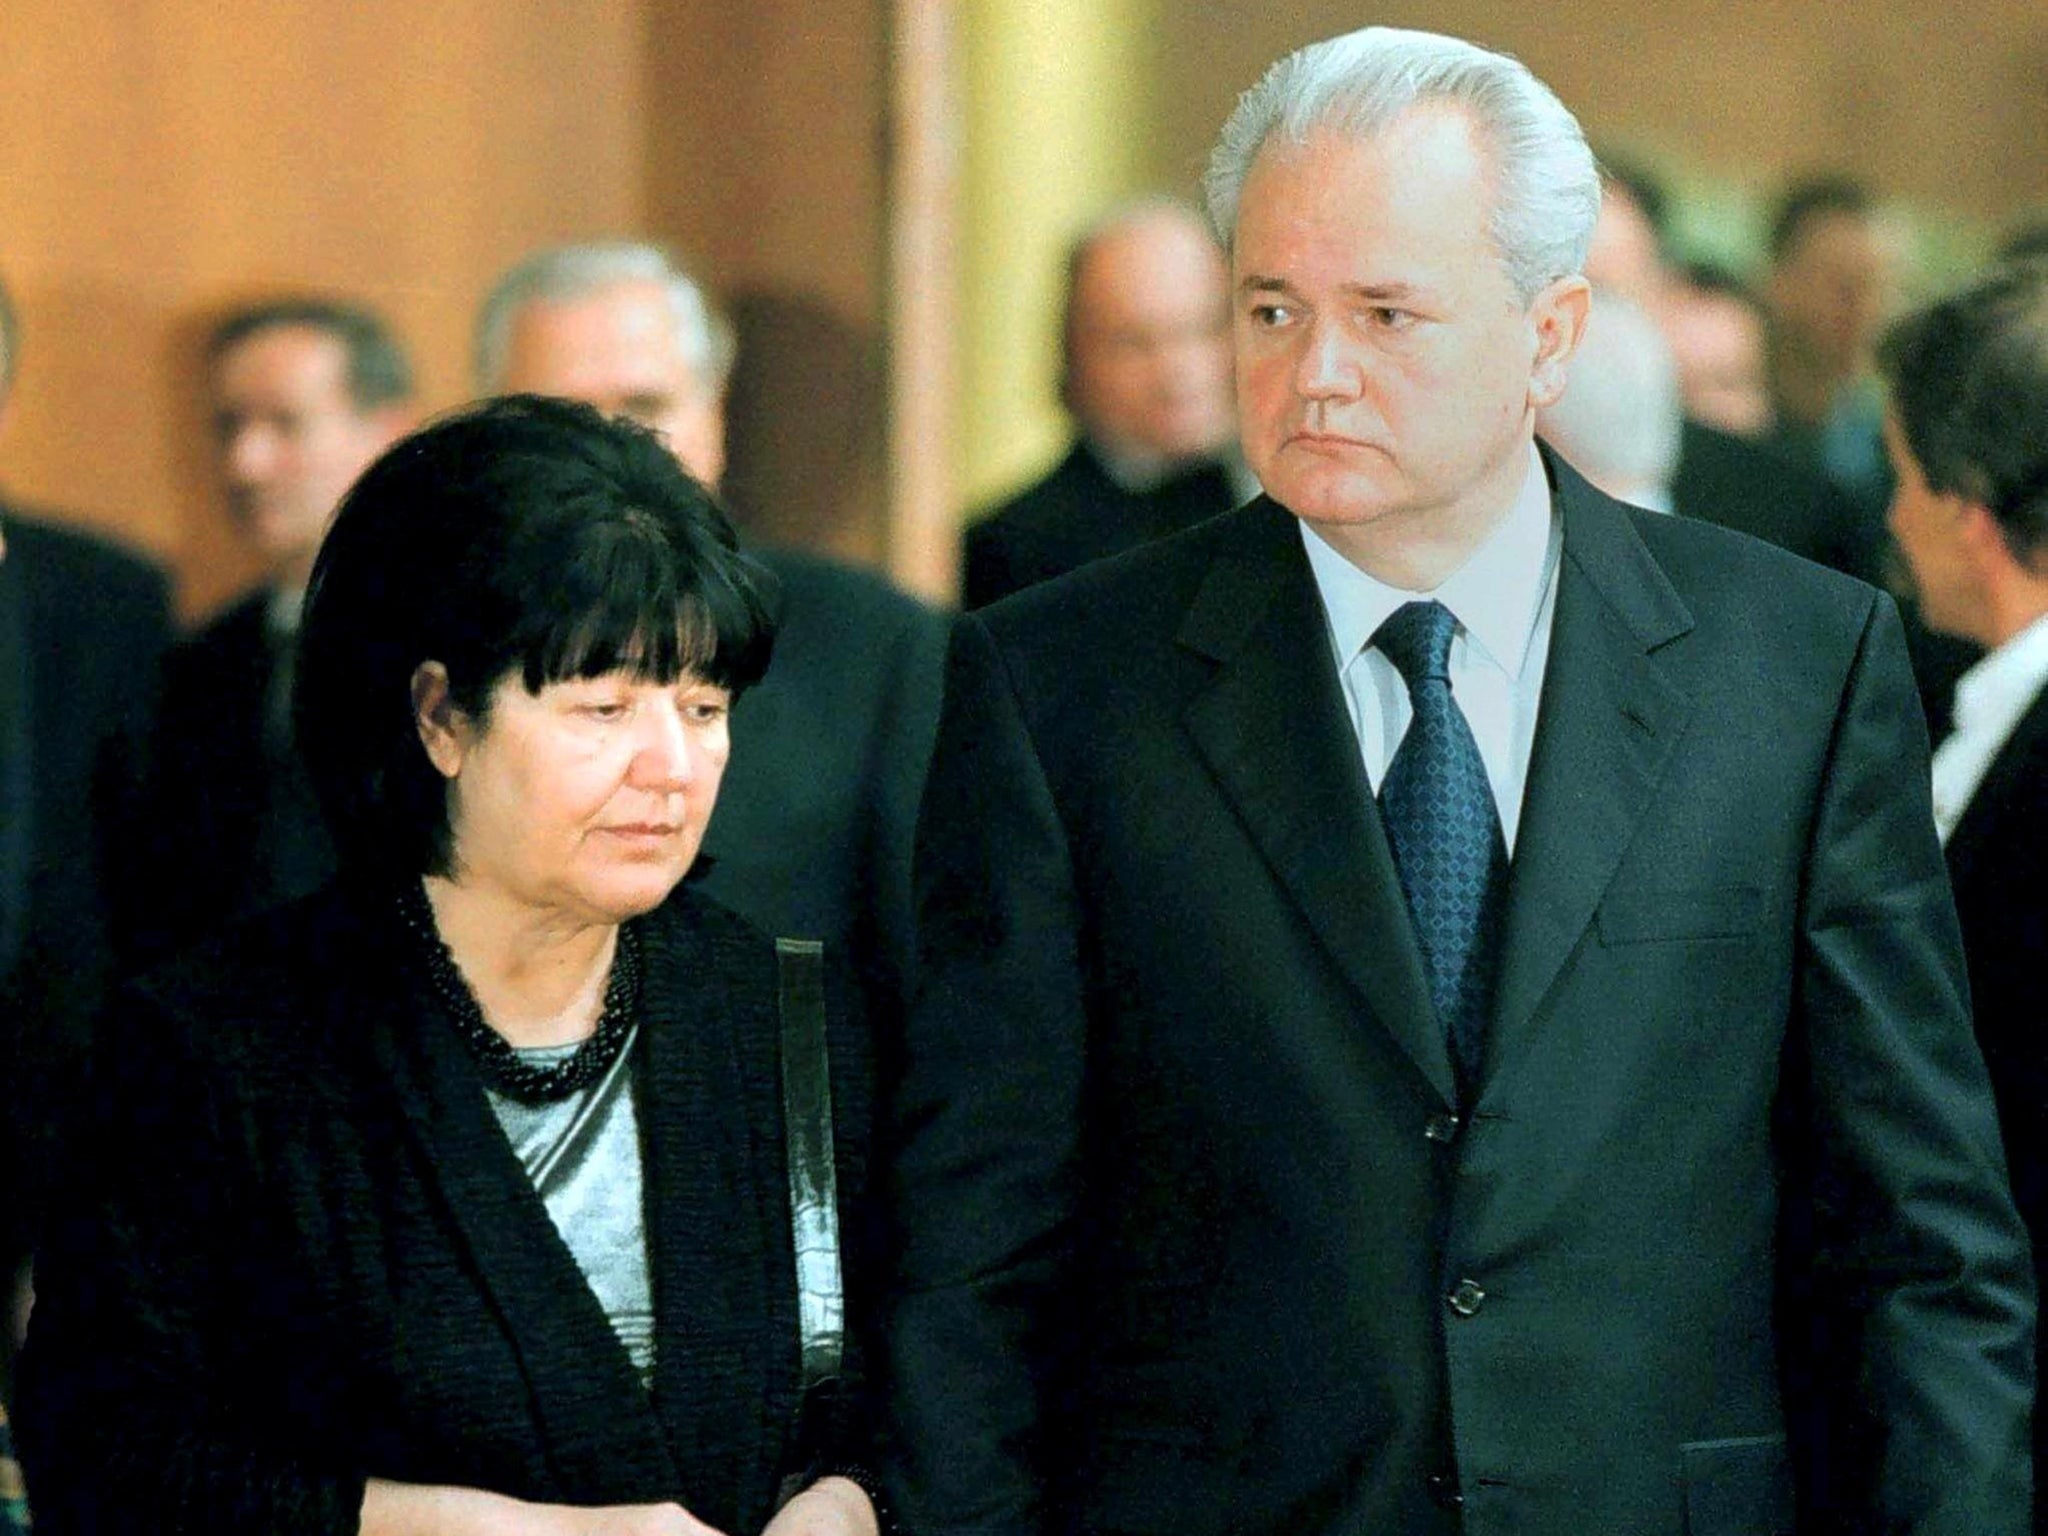 Mira Markovic with her husband, the former Yugoslav President Slobodan Milosevic,
in 2000, six years before his death